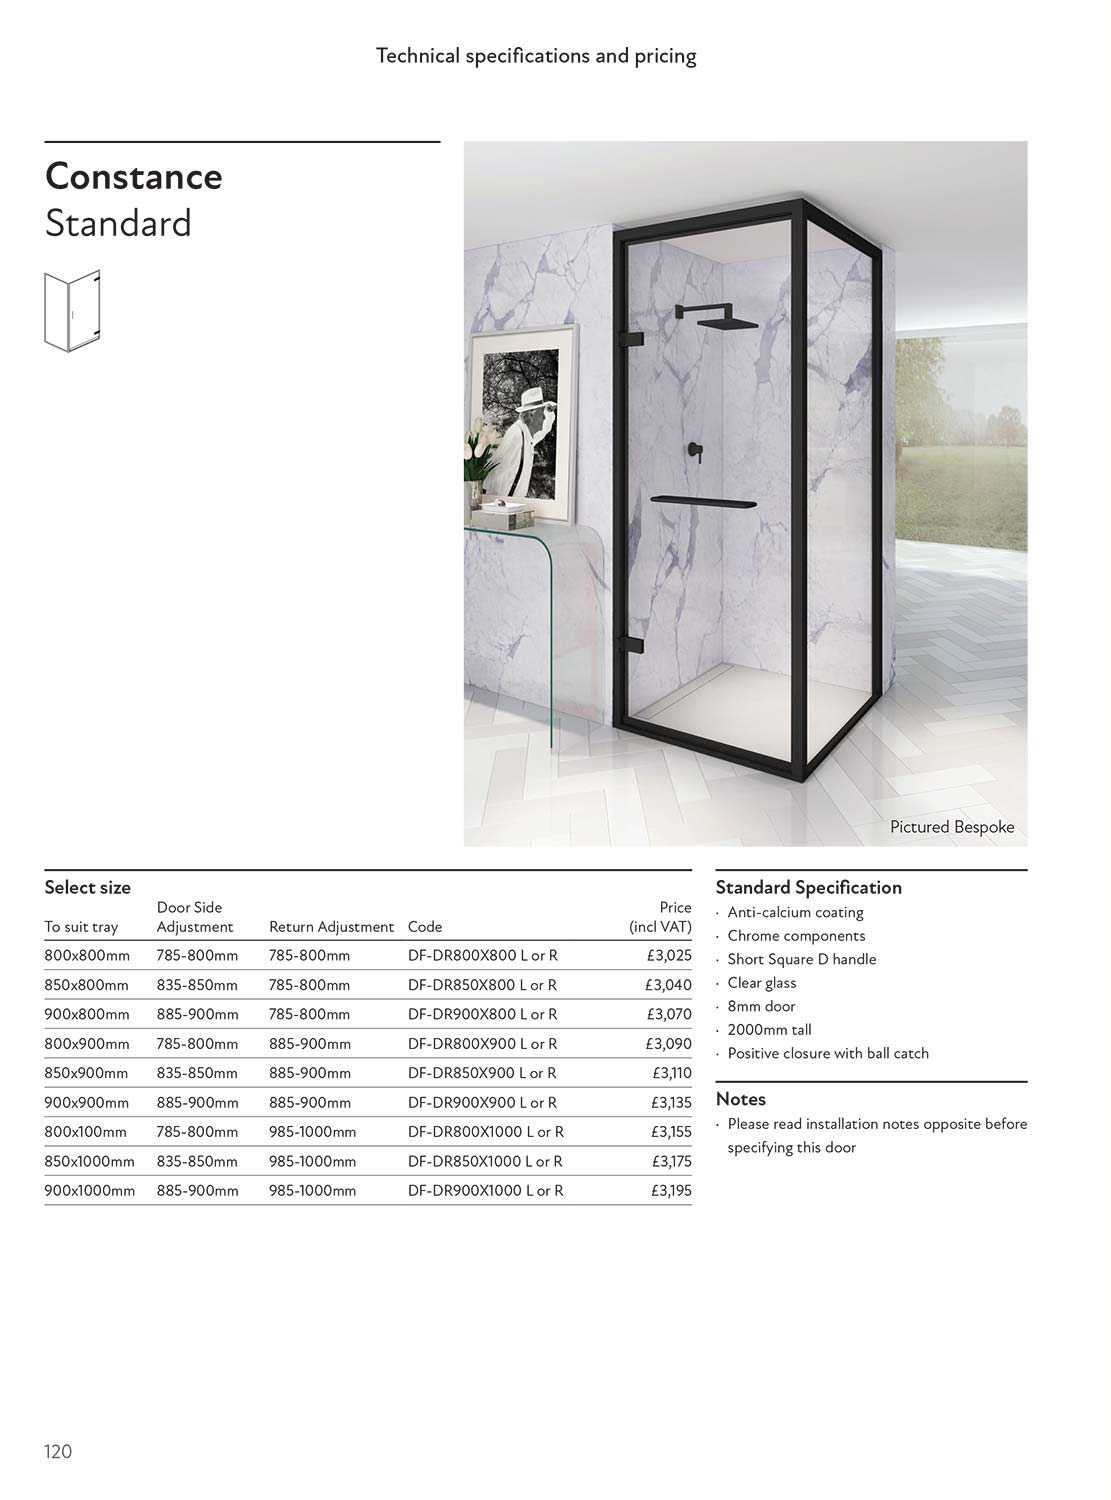 Constance Standard specification